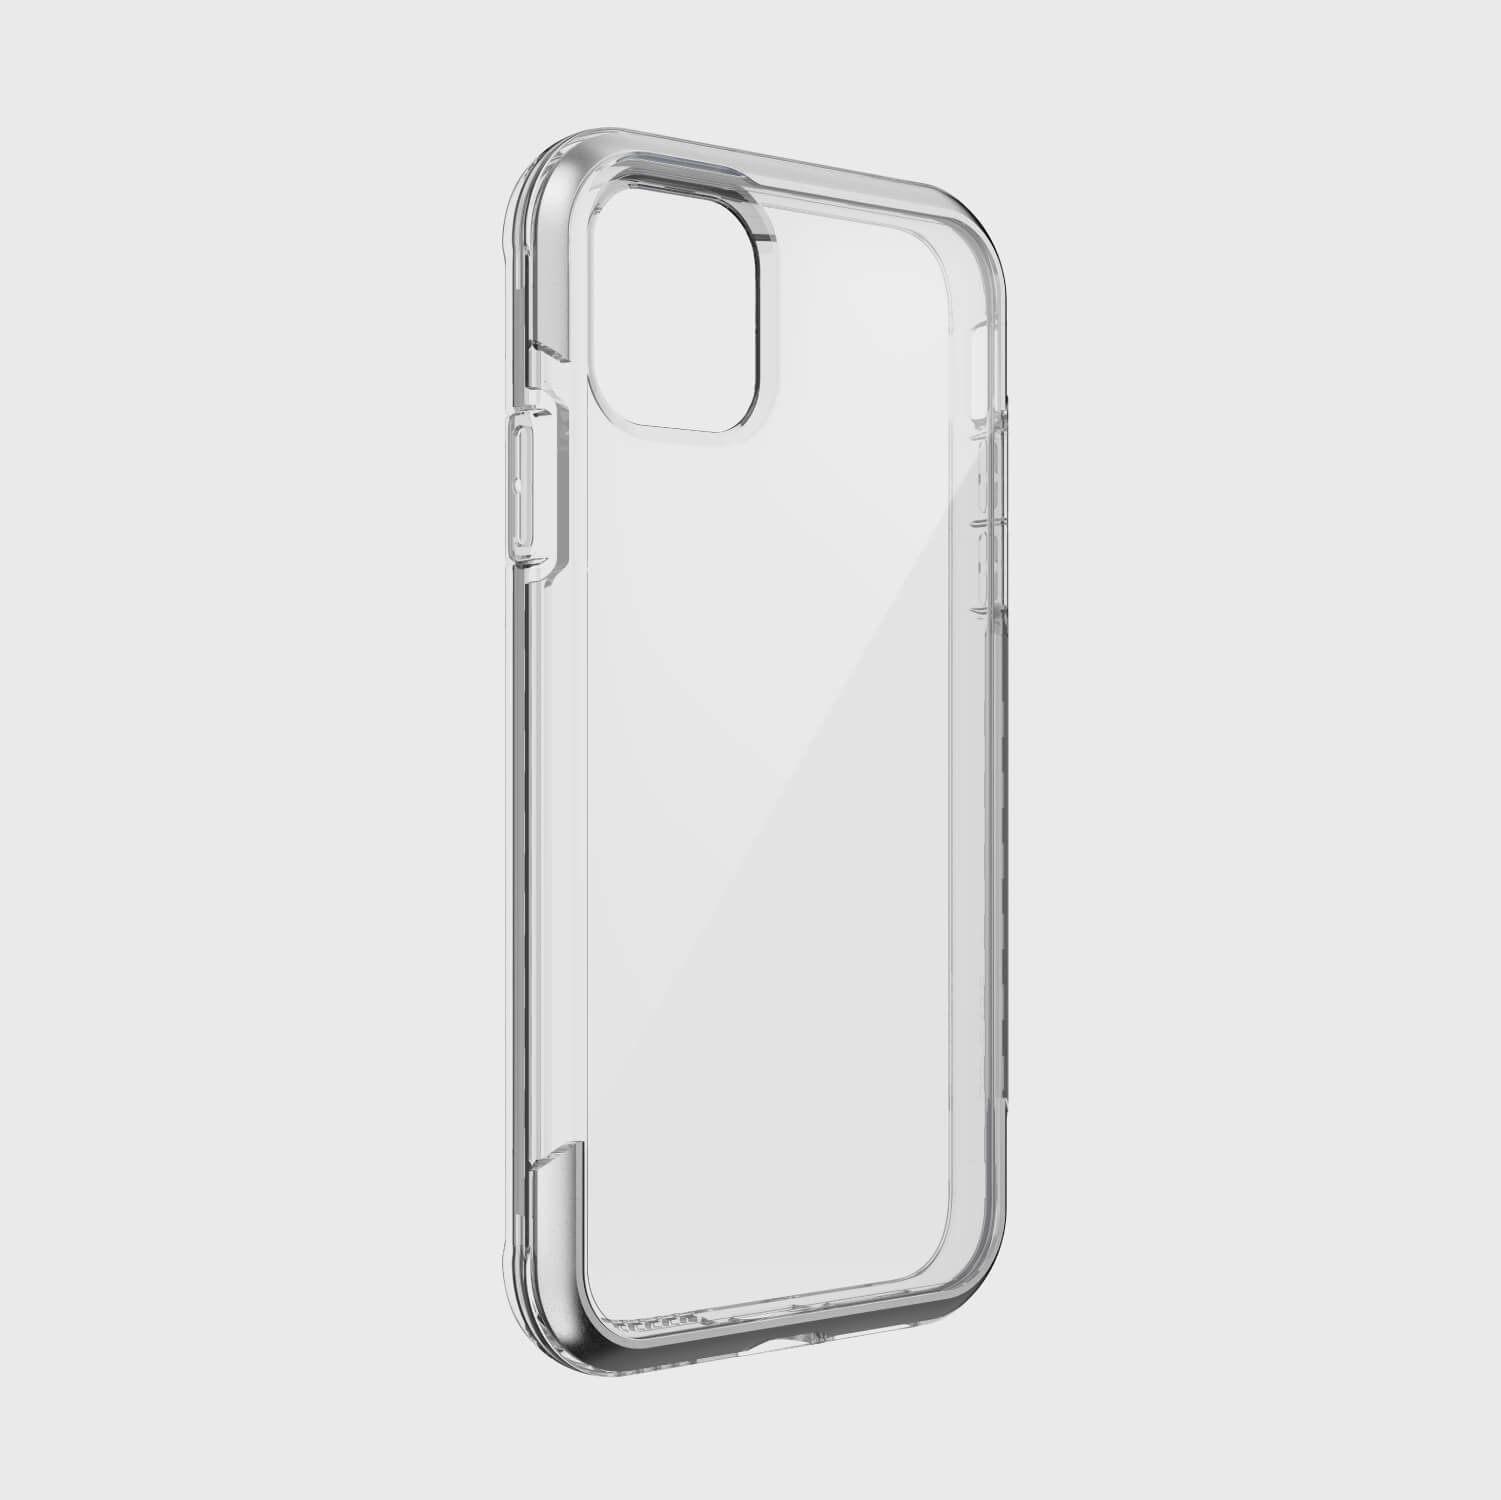 A Raptic Air iPhone 11 Pro Max Case with 13 foot drop protection on a white background.